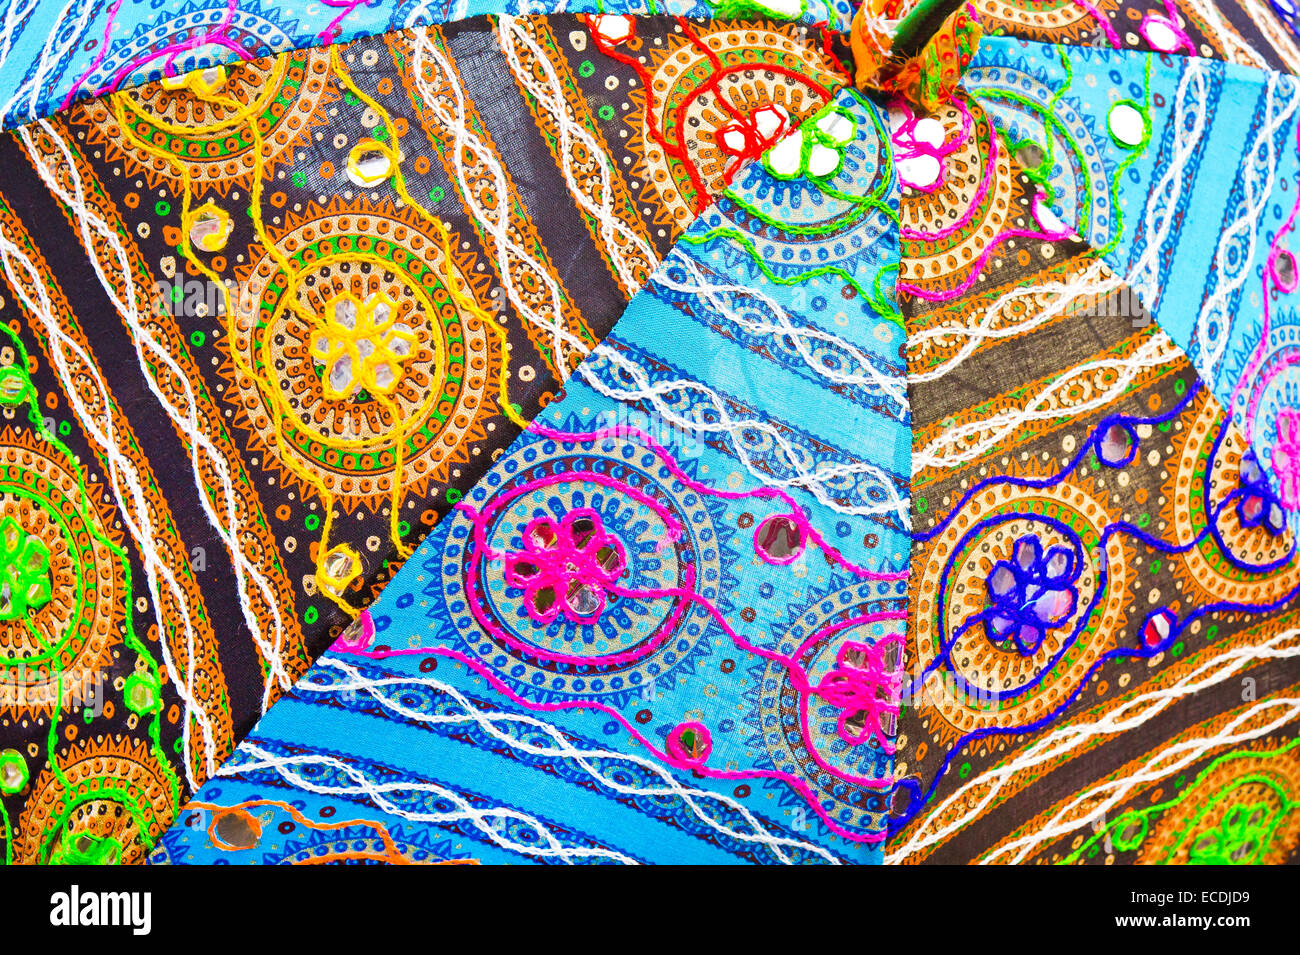 Part of an umbrella made from colorful indian cloth Stock Photo